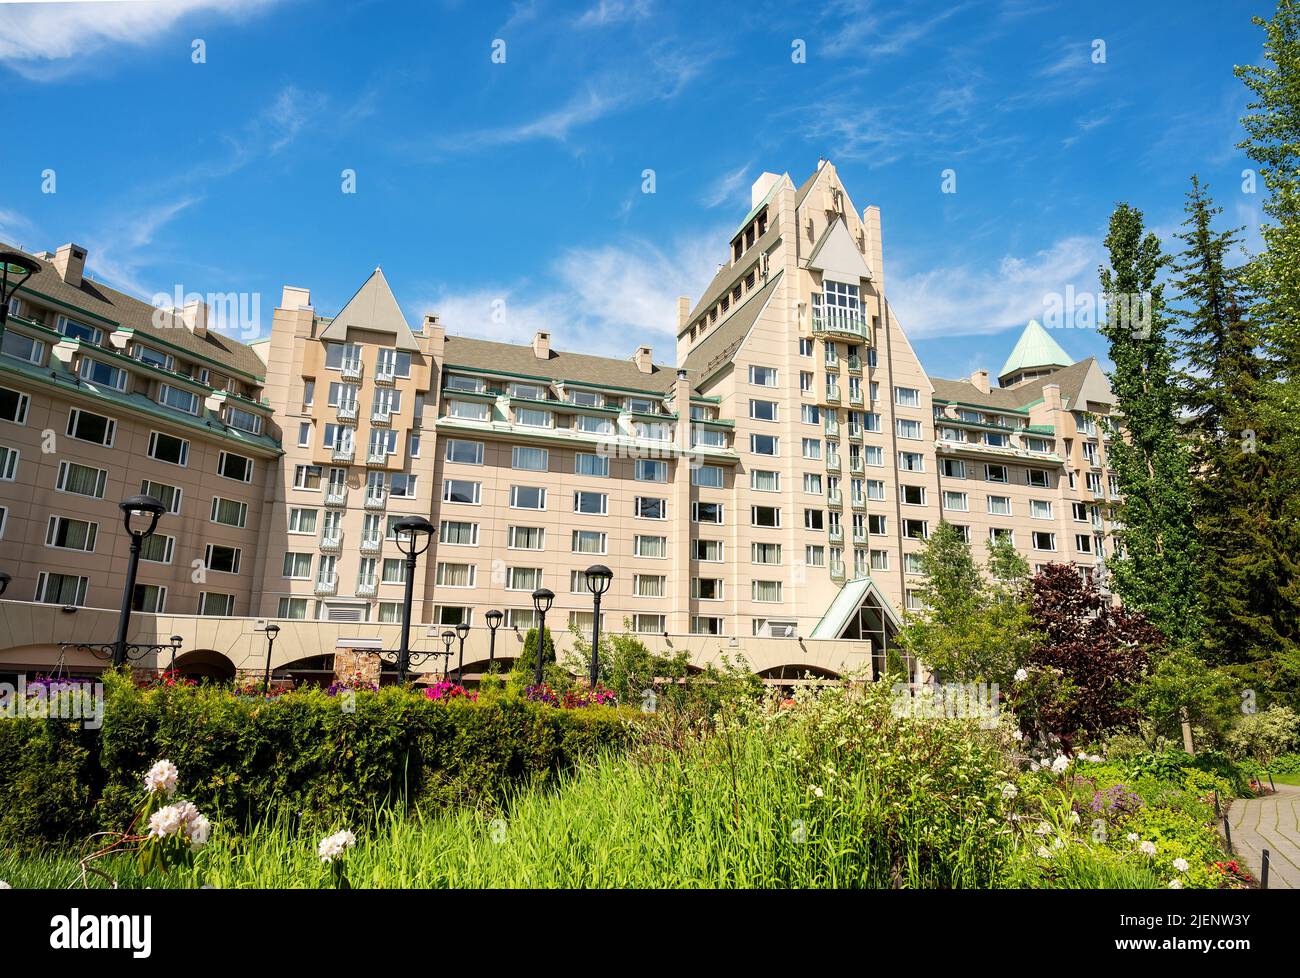 The Fairmont Chateau Report and Spa hotel in Whistler BC on a late summer day with a blue sky. Stock Photo